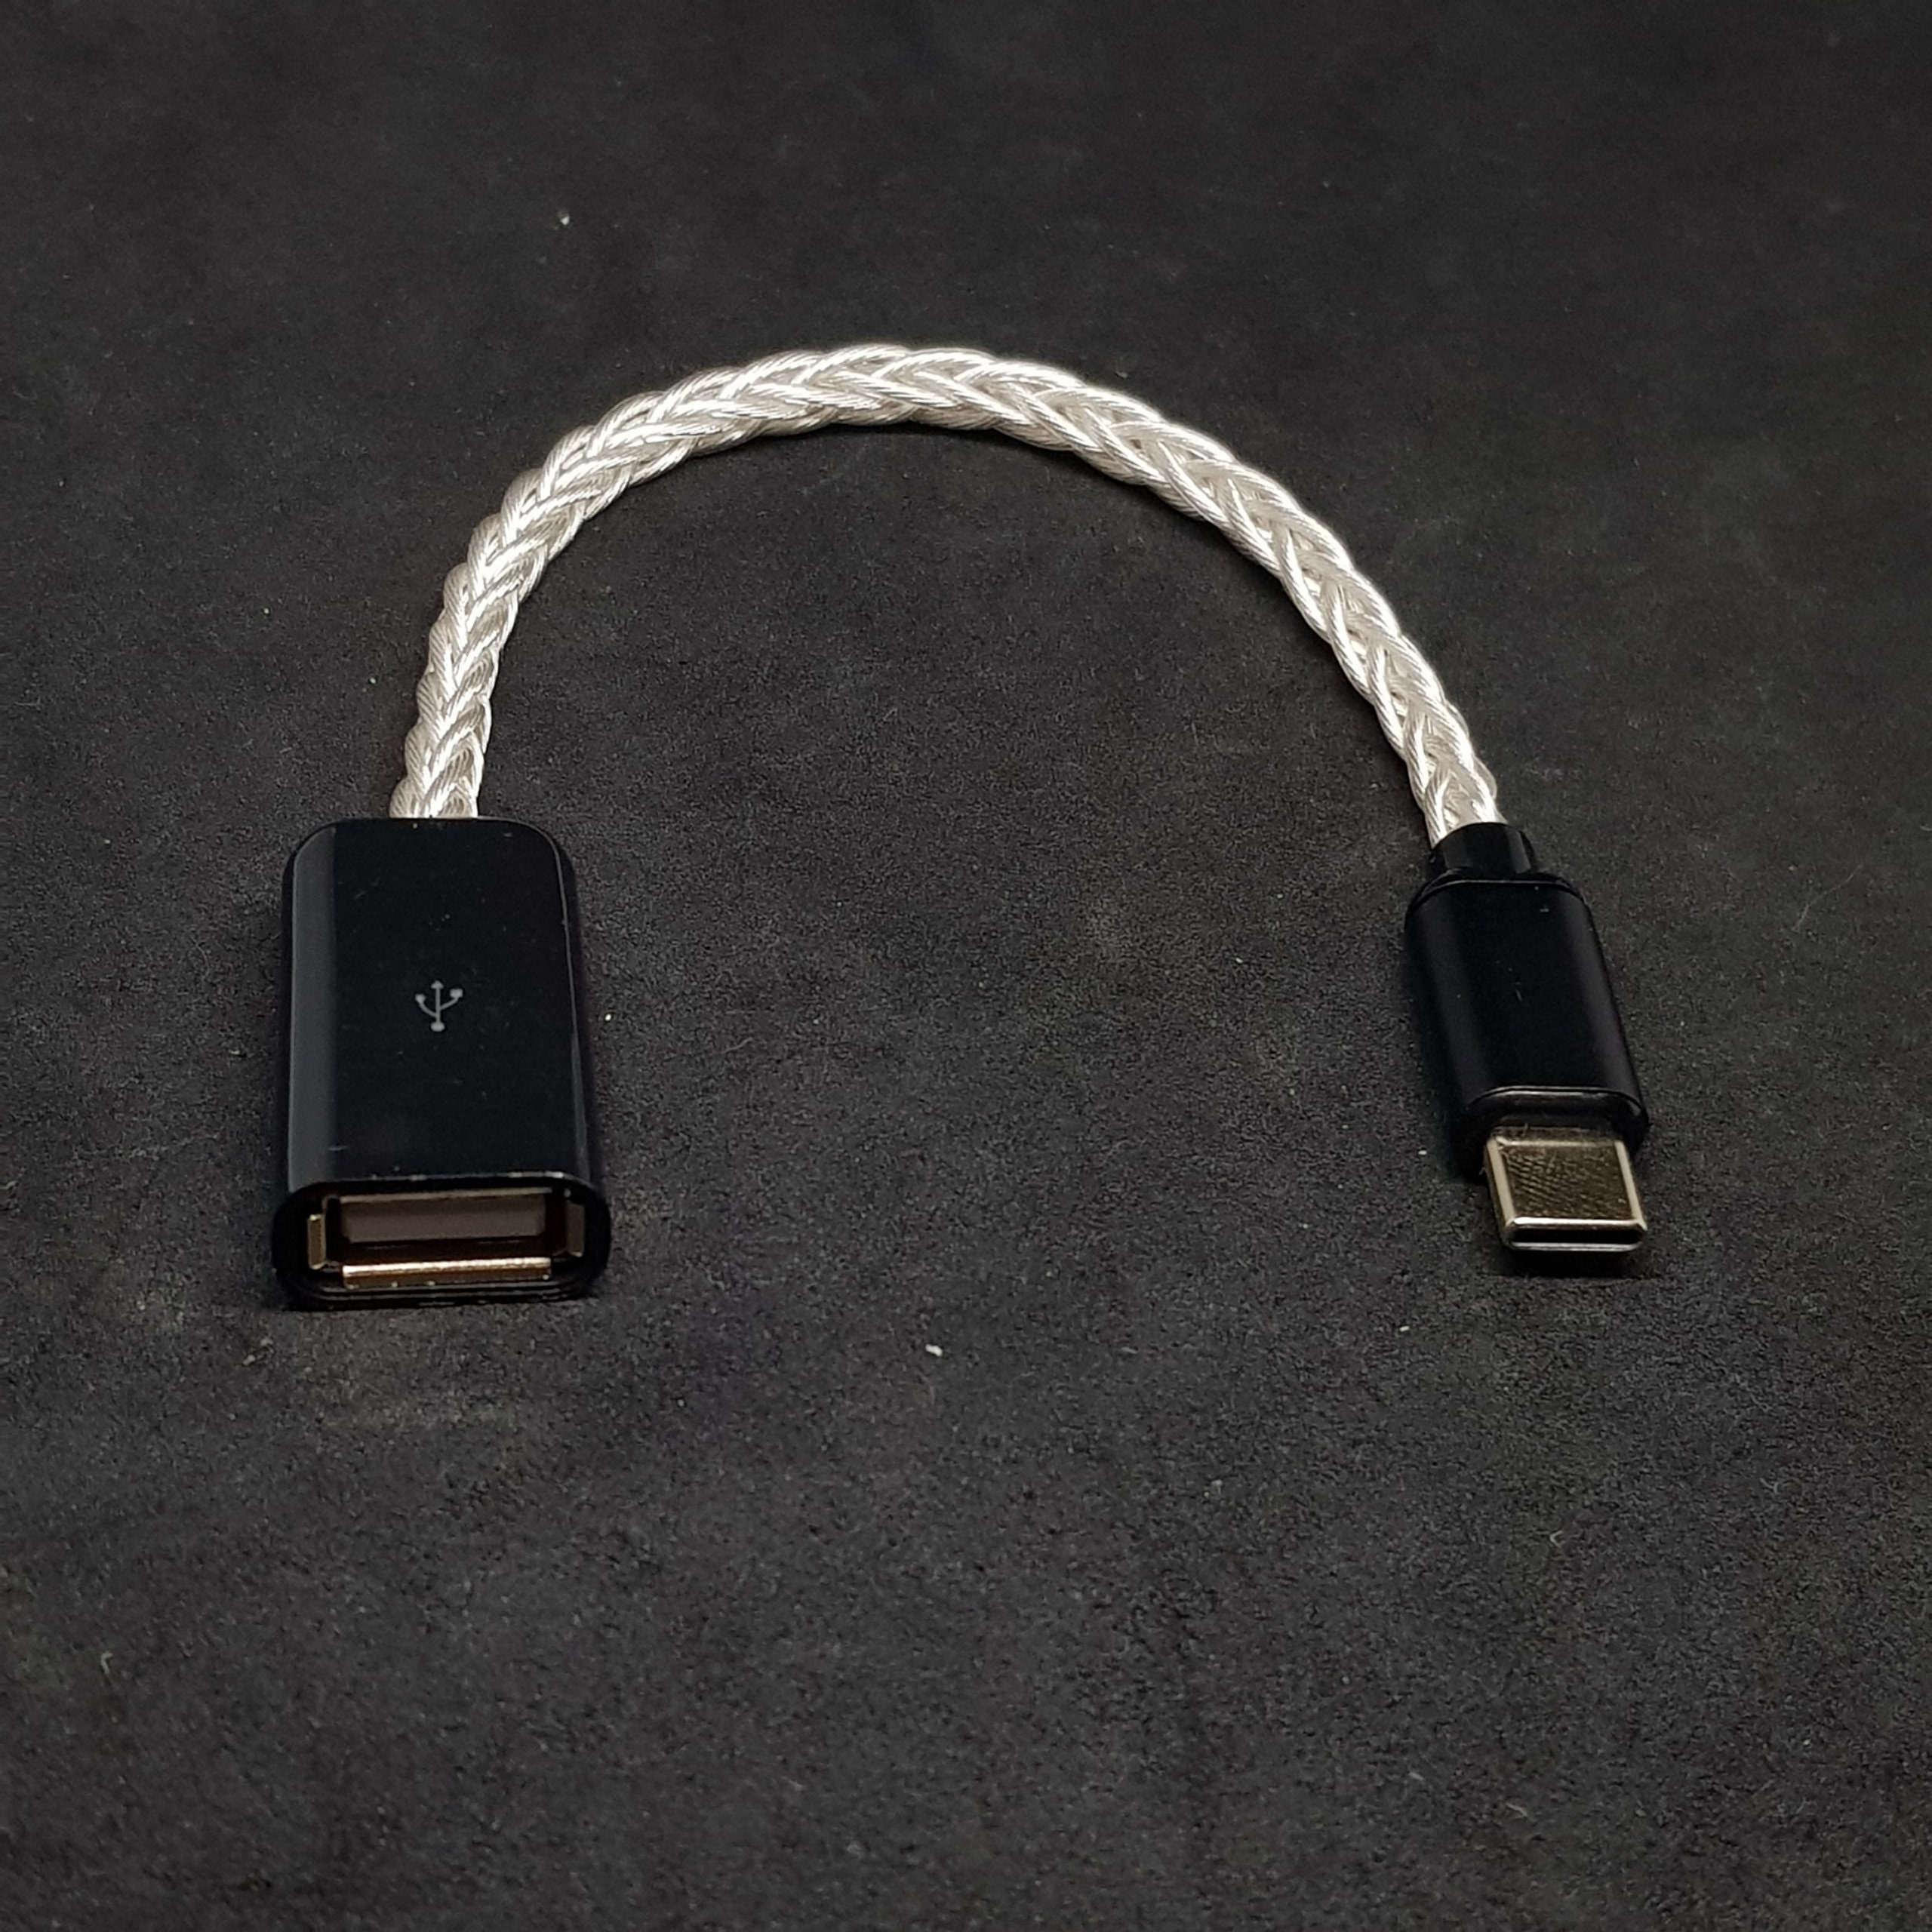 Custom OTG Cable for 8 Pins Iphone/ipad, Usb-c, Usb-b and Mirco Usb Connect  to AMP & DAC Audio 